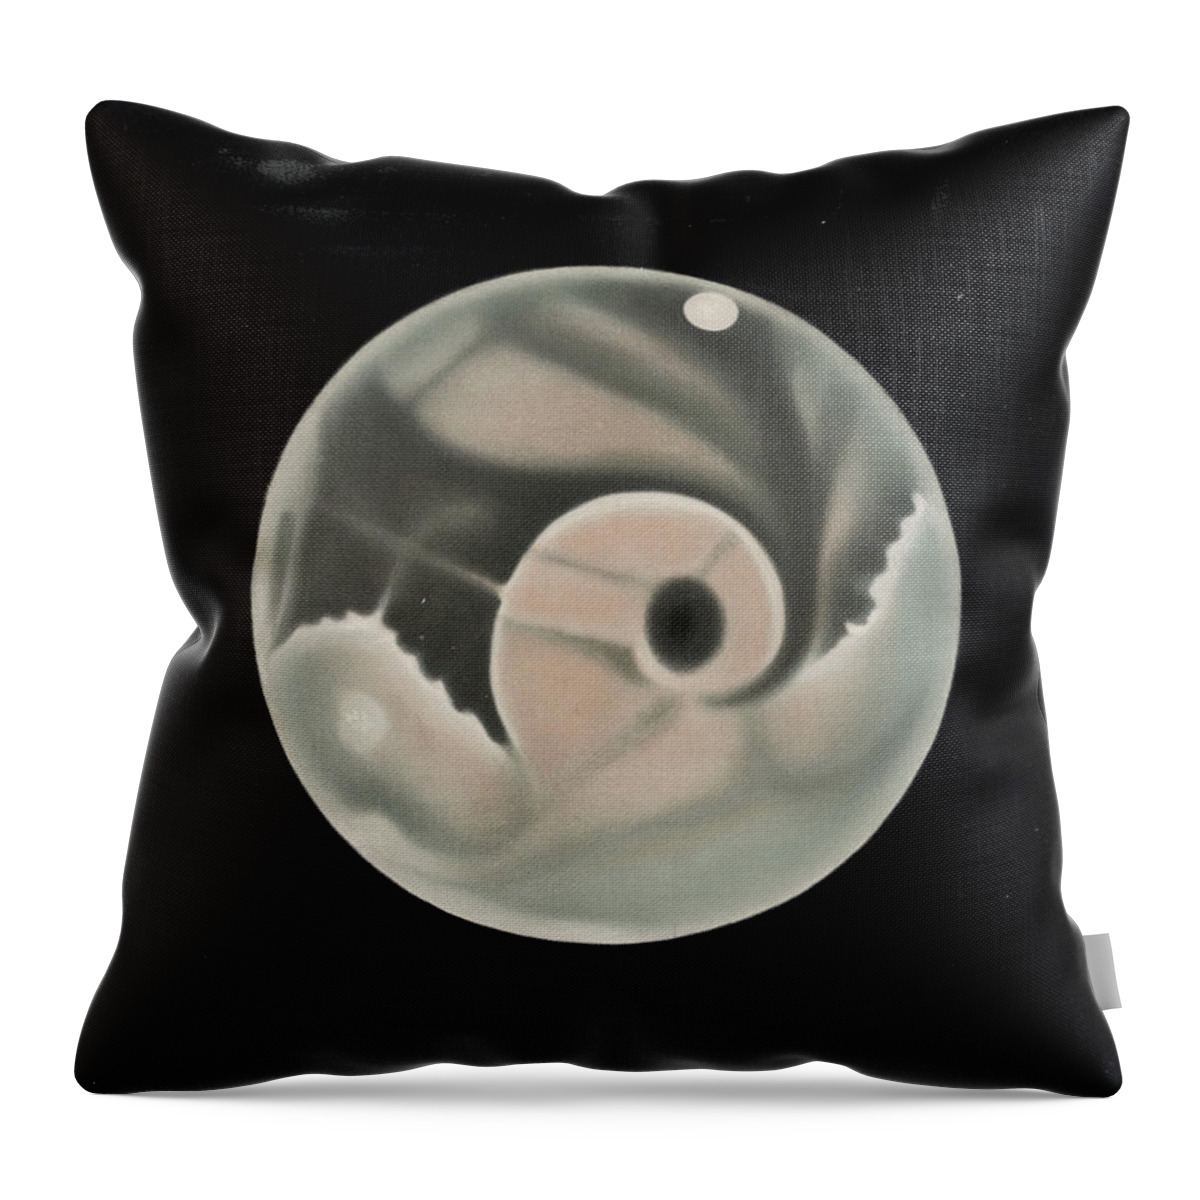 Astronomy Throw Pillow featuring the digital art Planet Mars by Long Shot